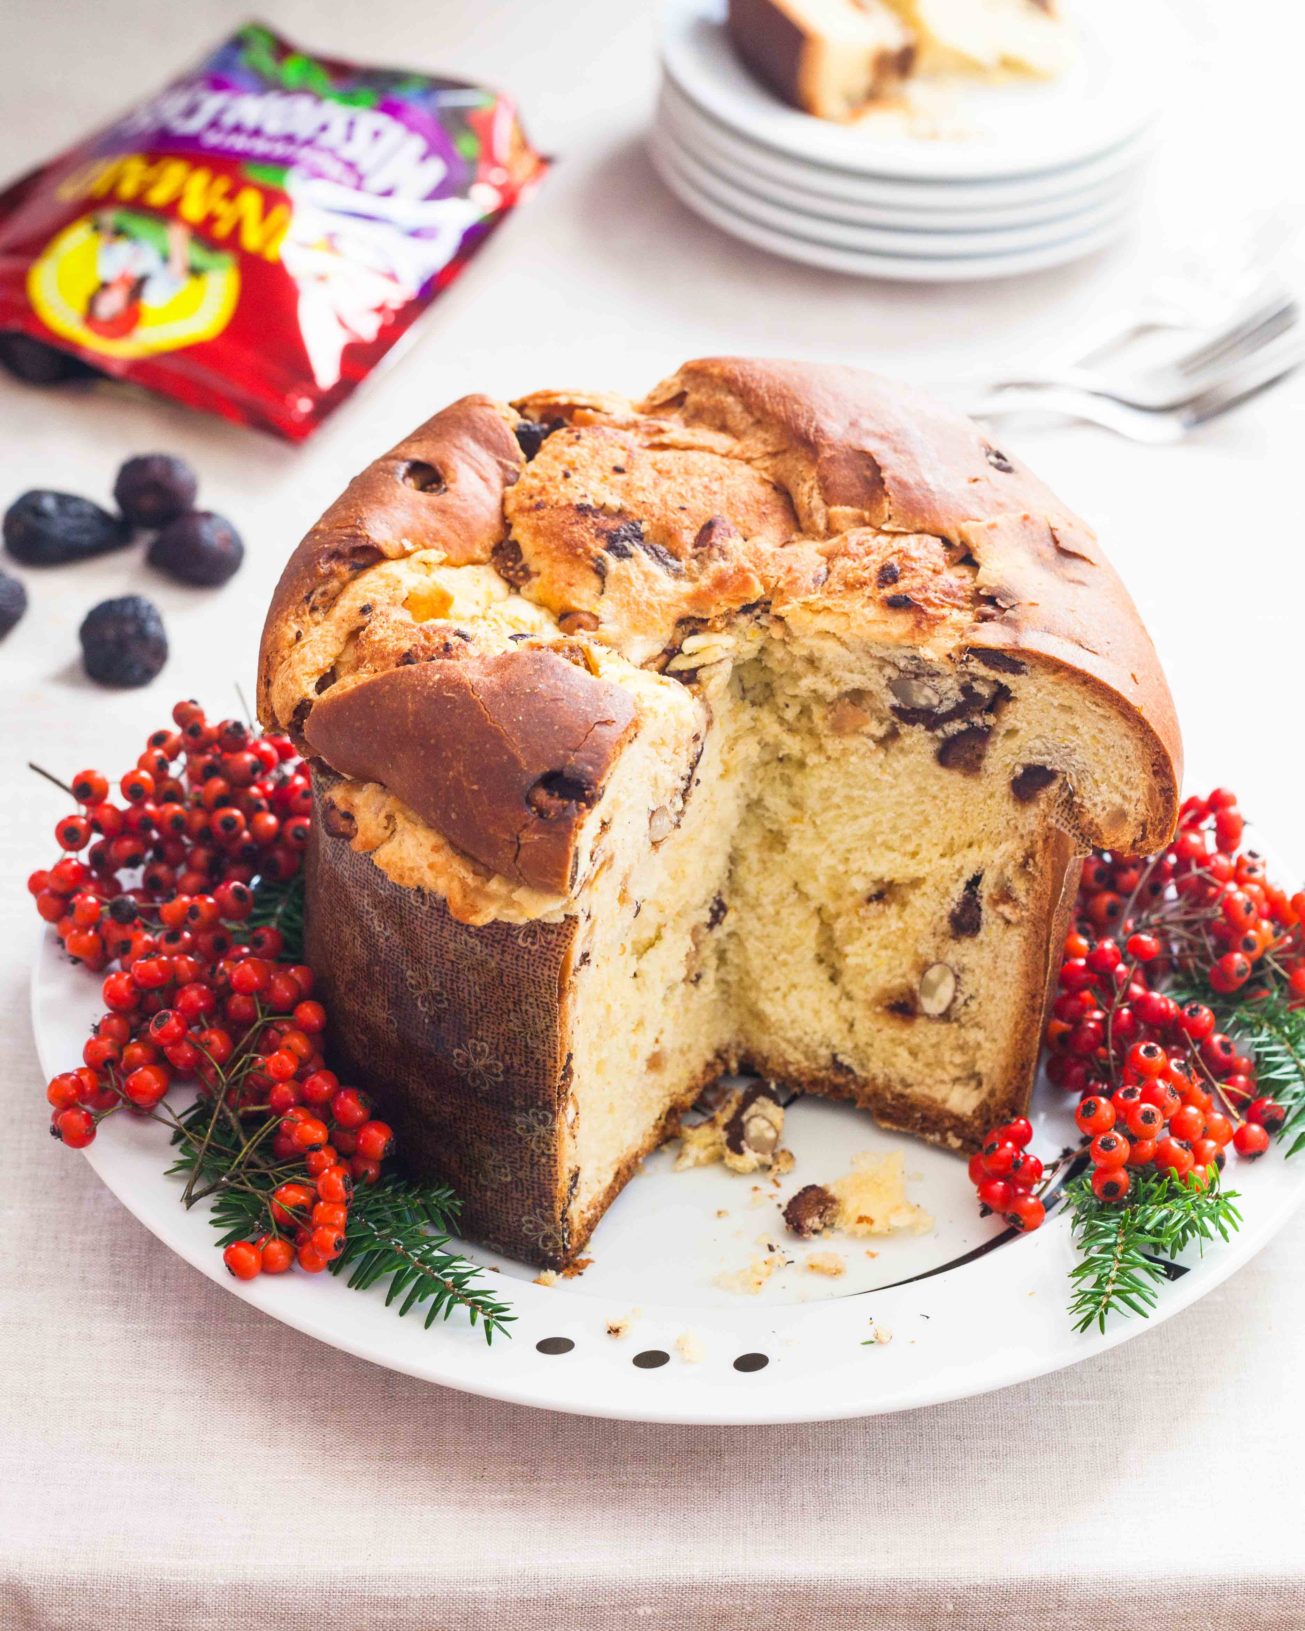 Dark chocolate panettone bread with dried figs and decorative winter berries on a platter.